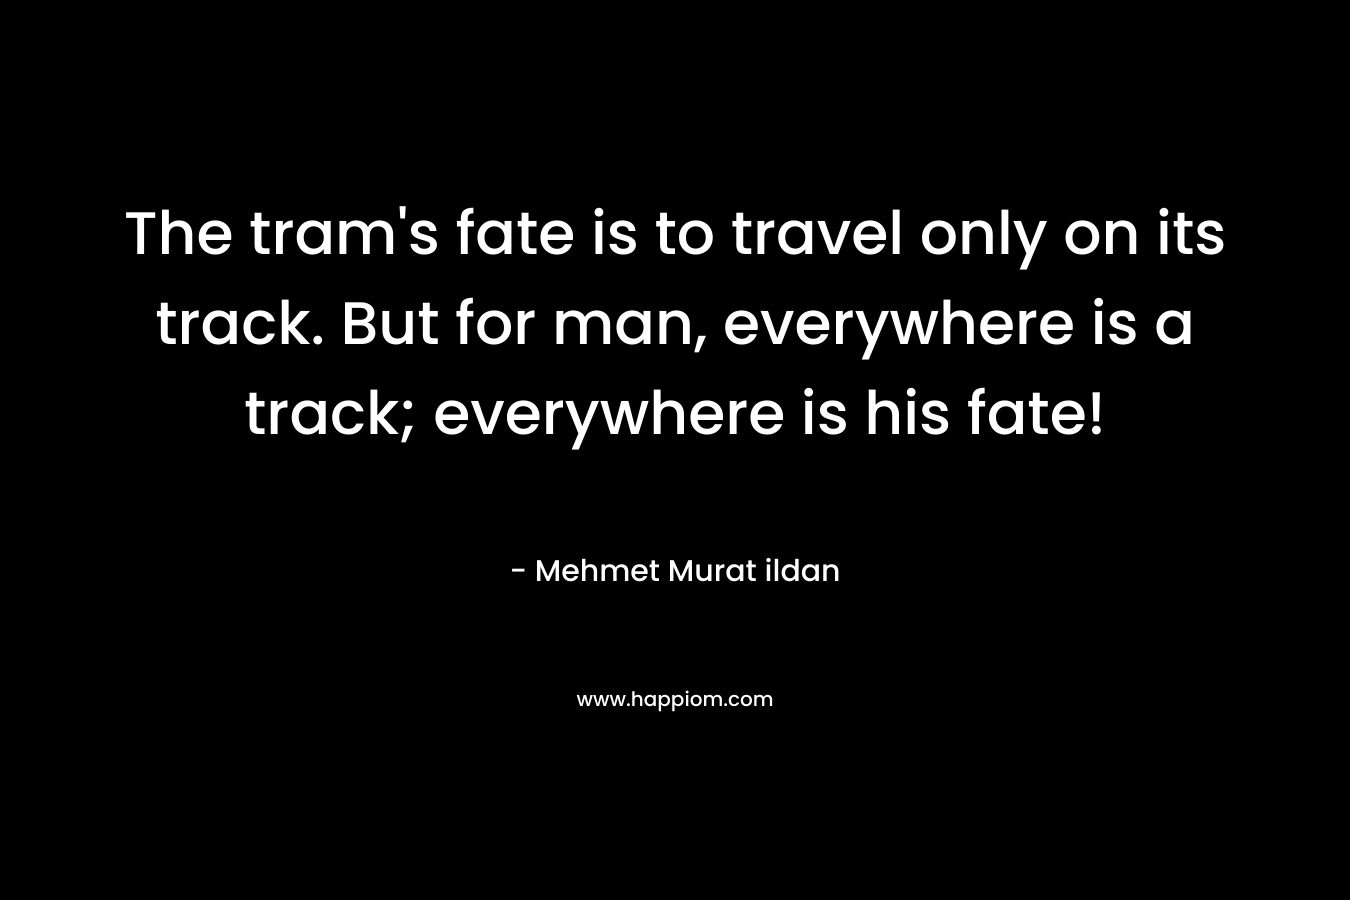 The tram’s fate is to travel only on its track. But for man, everywhere is a track; everywhere is his fate! – Mehmet Murat ildan